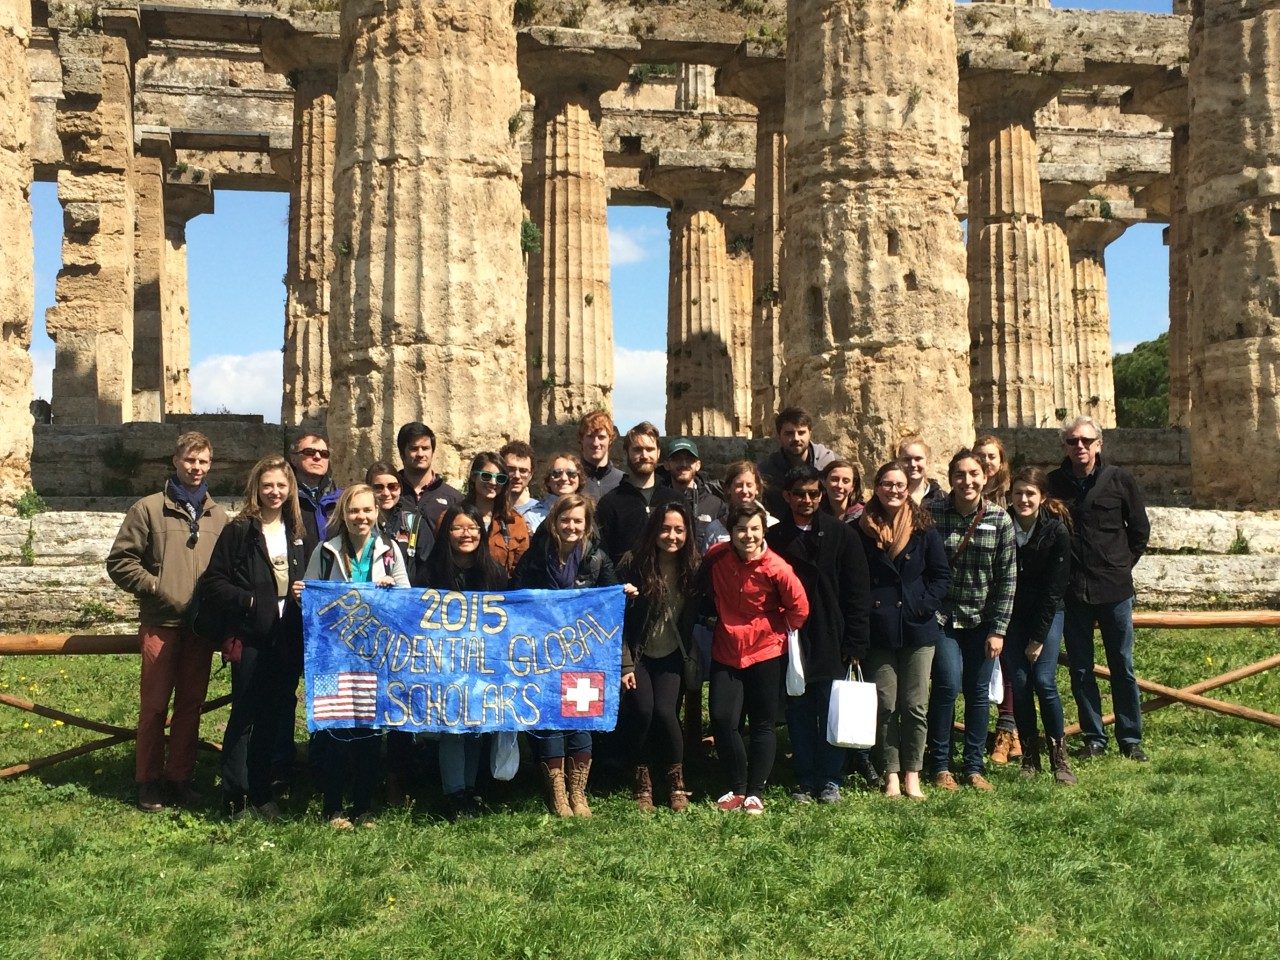 The group of University Honors students and faculty were based in Riva San Vitale, Switzerland for the spring 2015 semester, but traveled to a variety of places including Paestum in Campania, Italy.